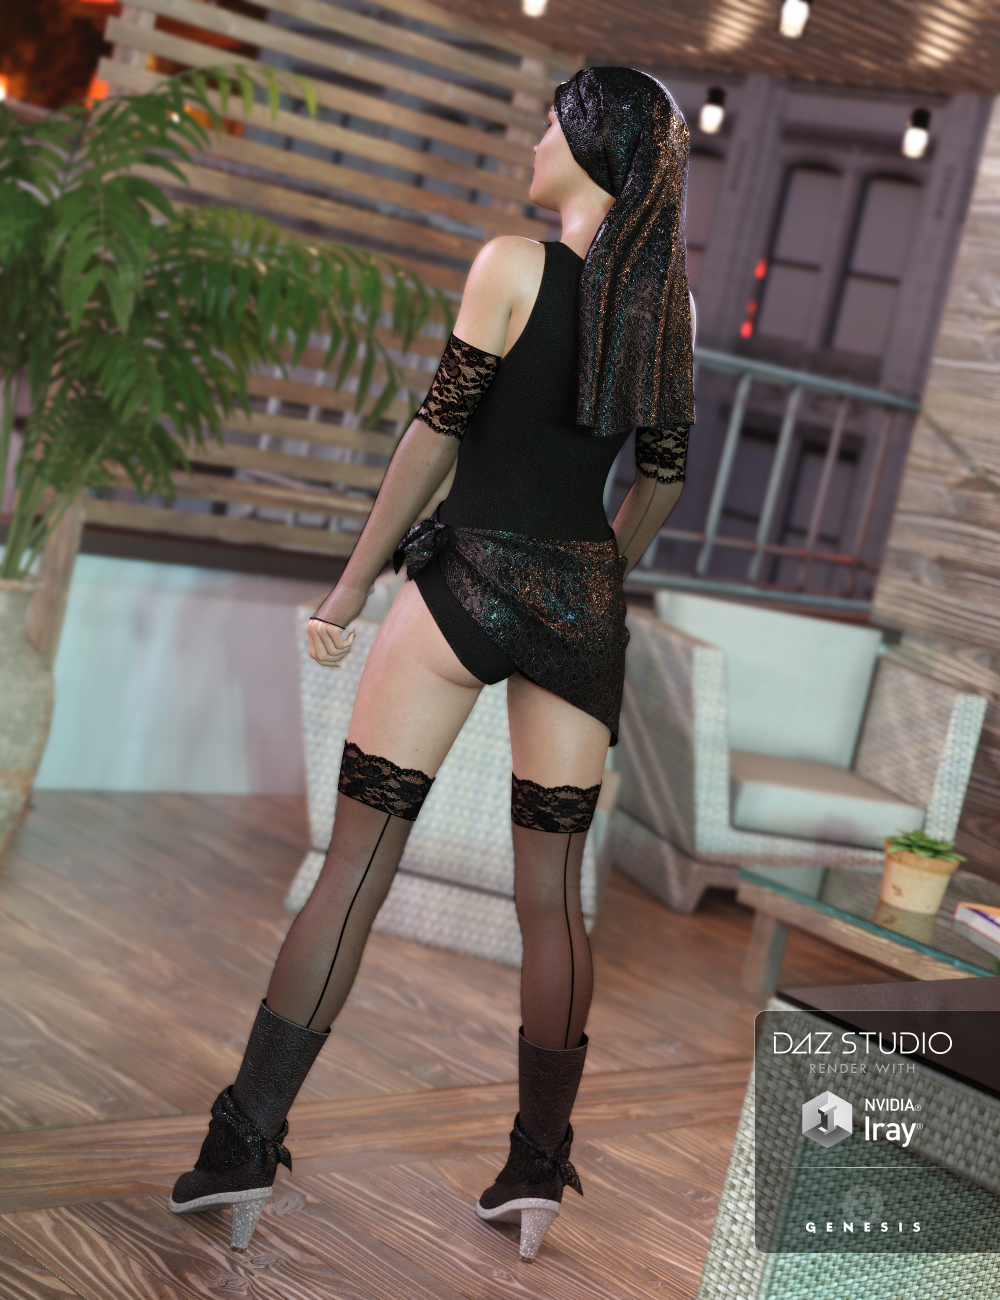 Super Chic by: Sarsa, 3D Models by Daz 3D